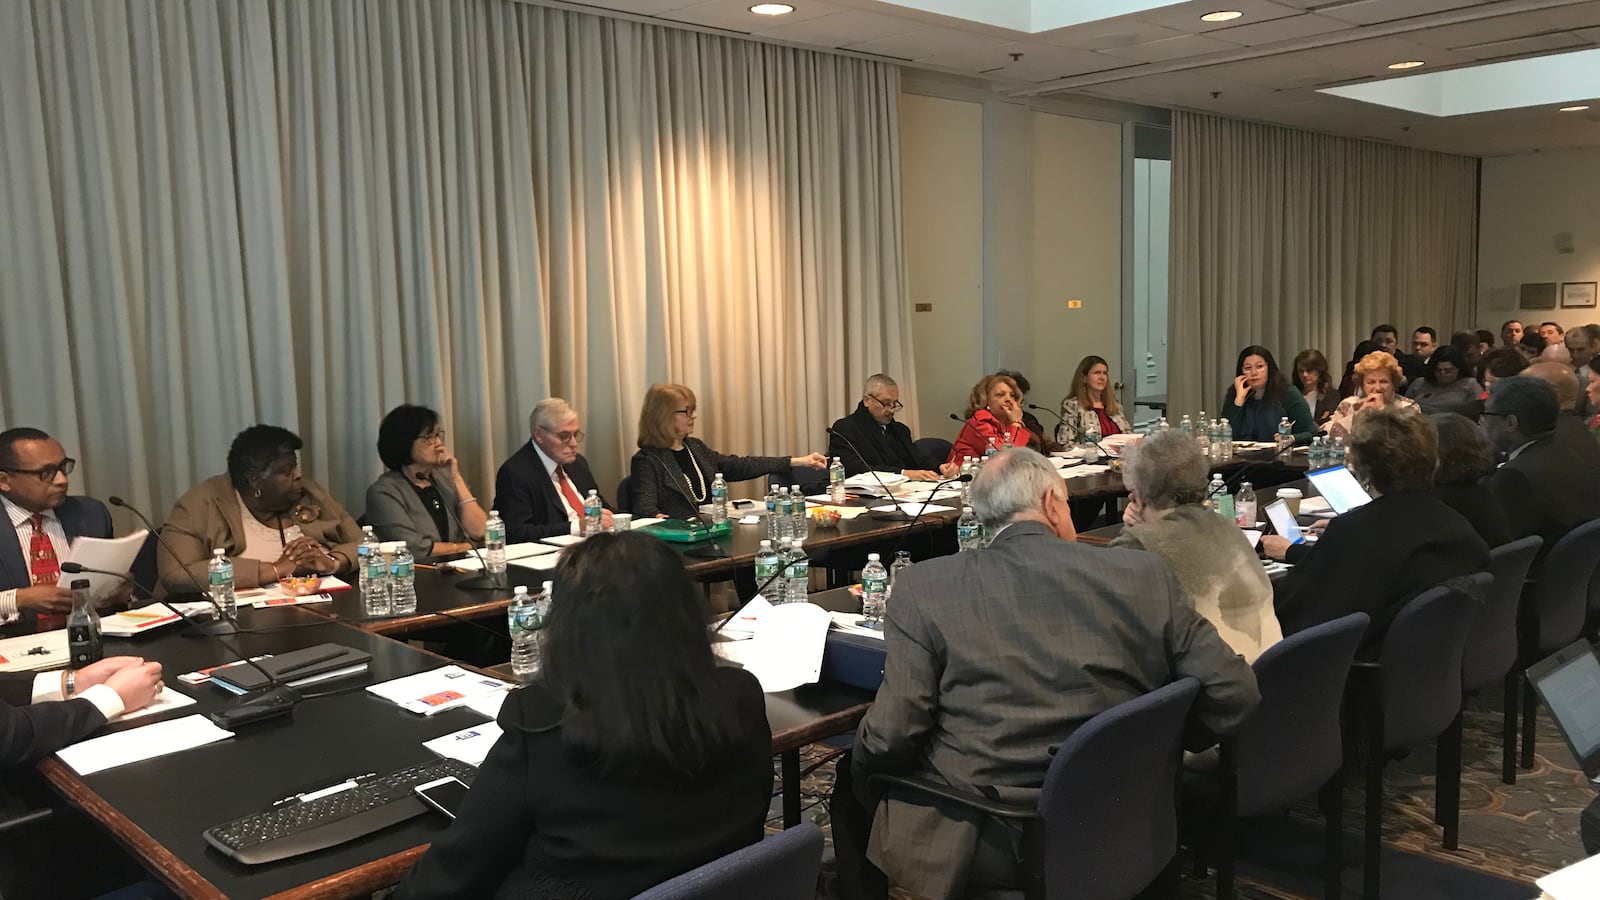 The New York Board of Regents meet at their December 2018 meeting.